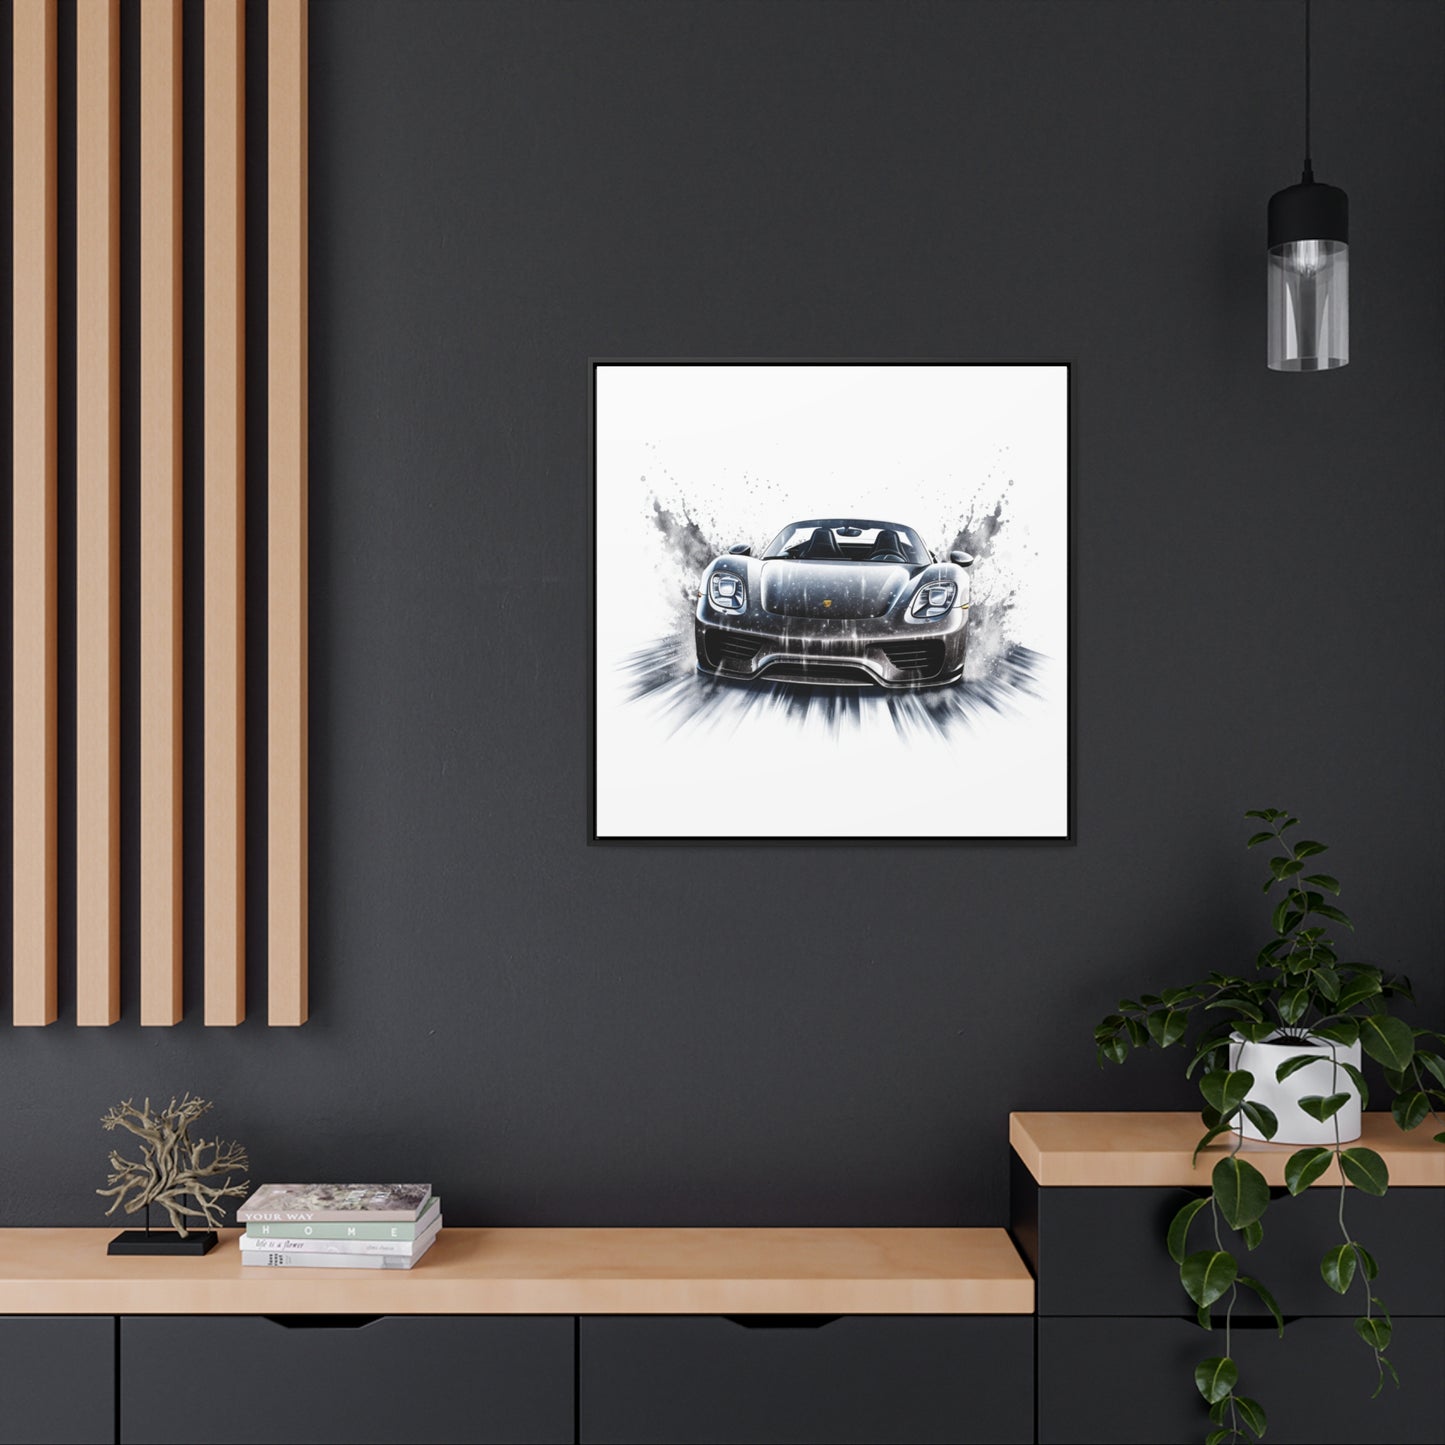 Gallery Canvas Wraps, Square Frame 918 Spyder white background driving fast with water splashing 3